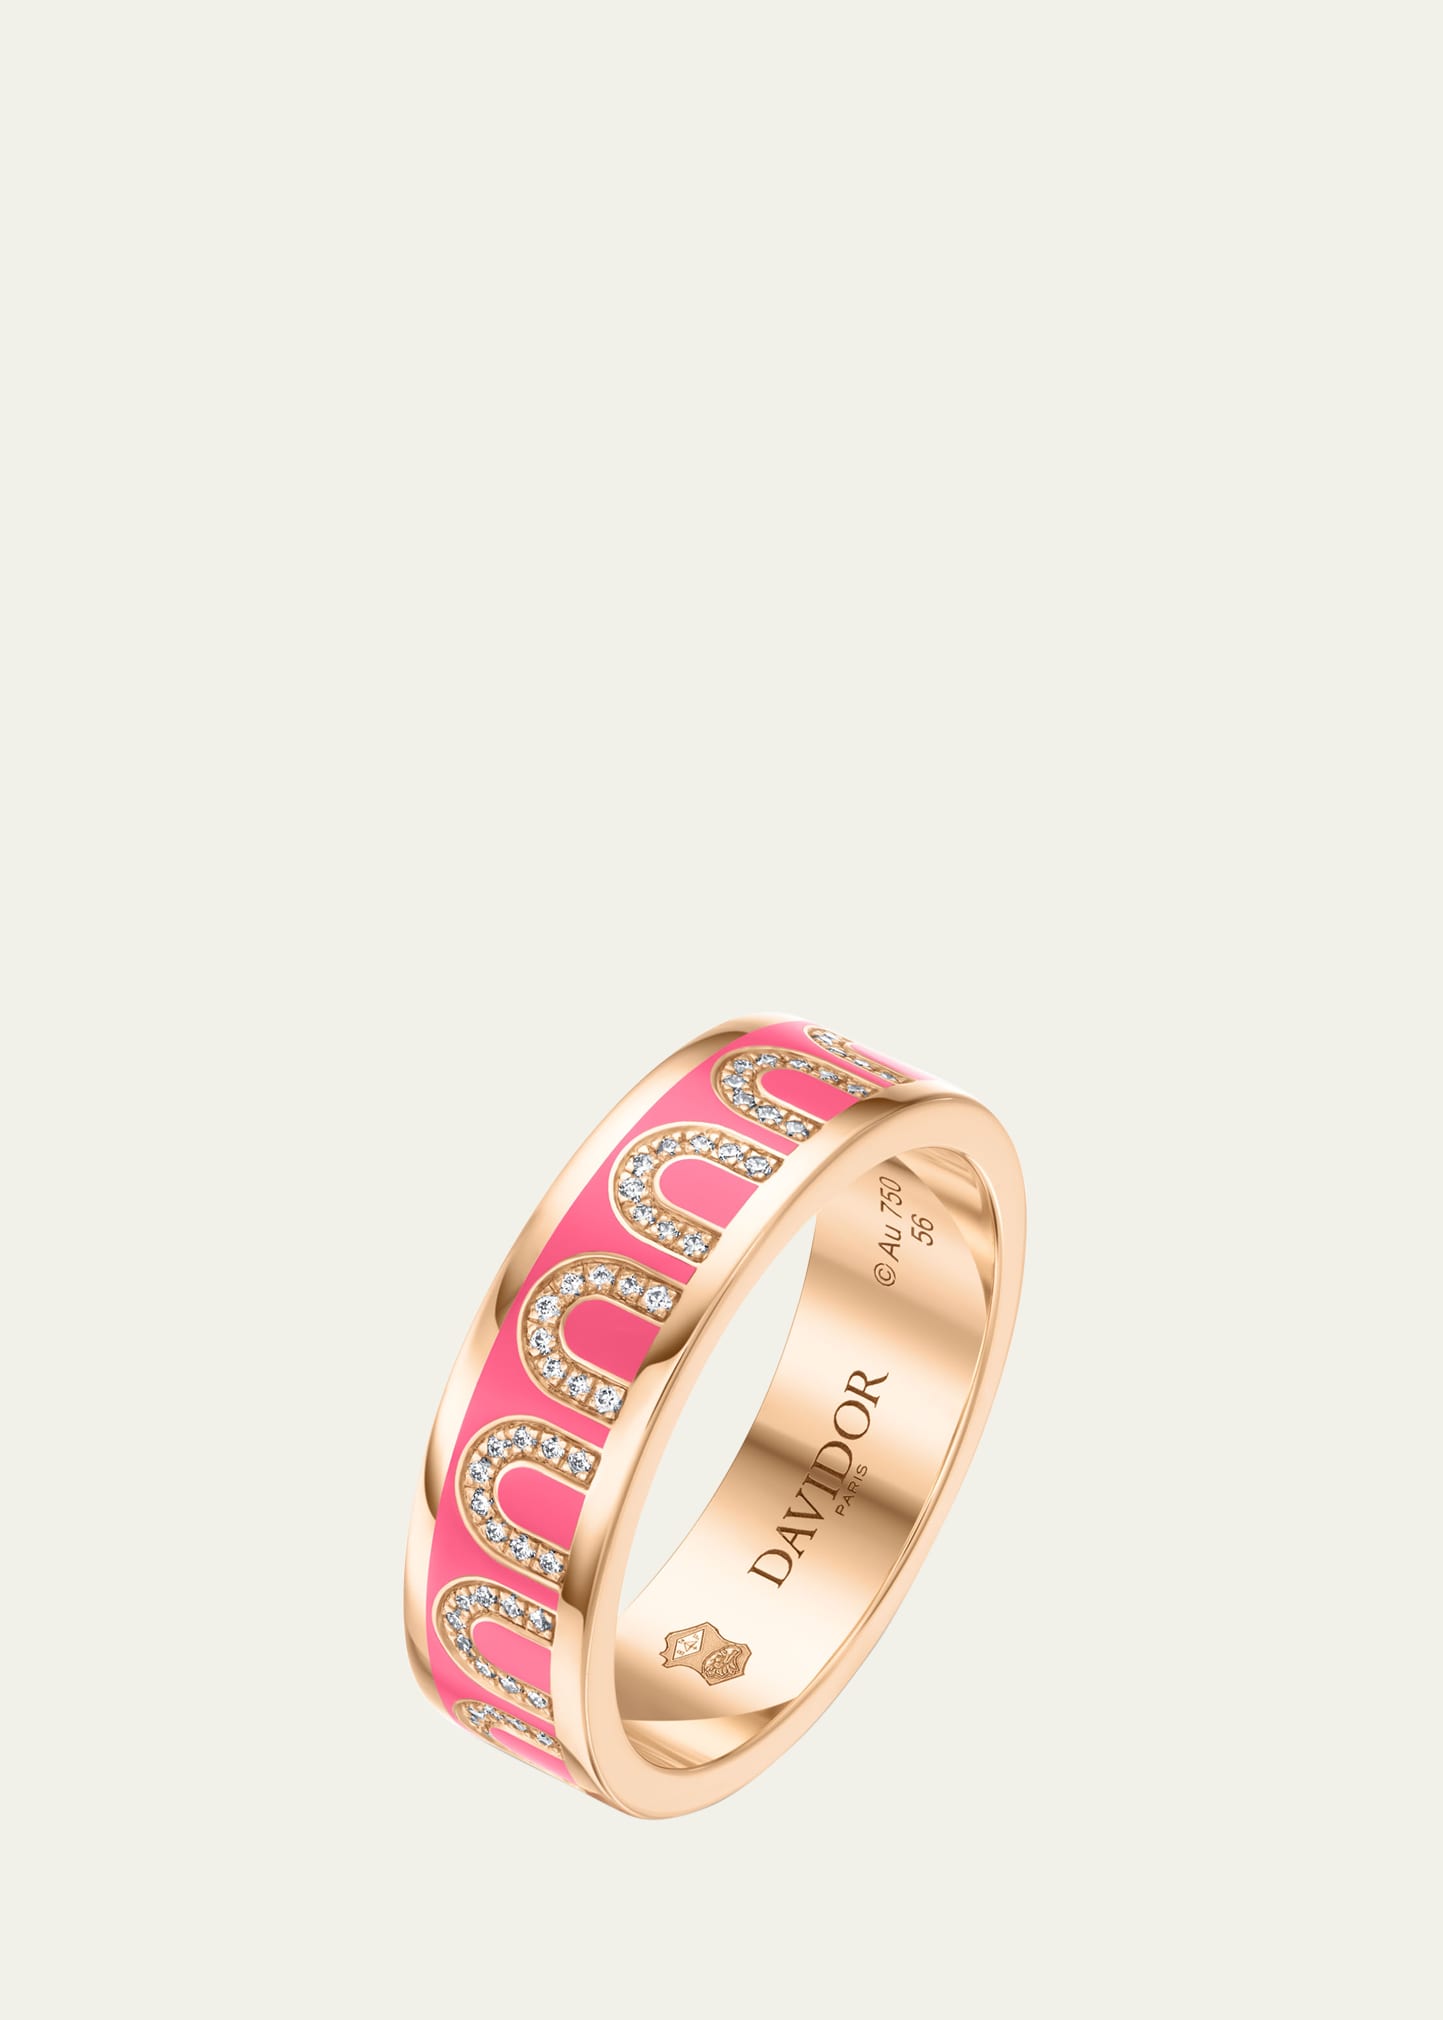 Davidor L'arc De  Ring Mm In 18k Rose Gold With Flamant Lacquered Ceramic And Arcade Diamonds